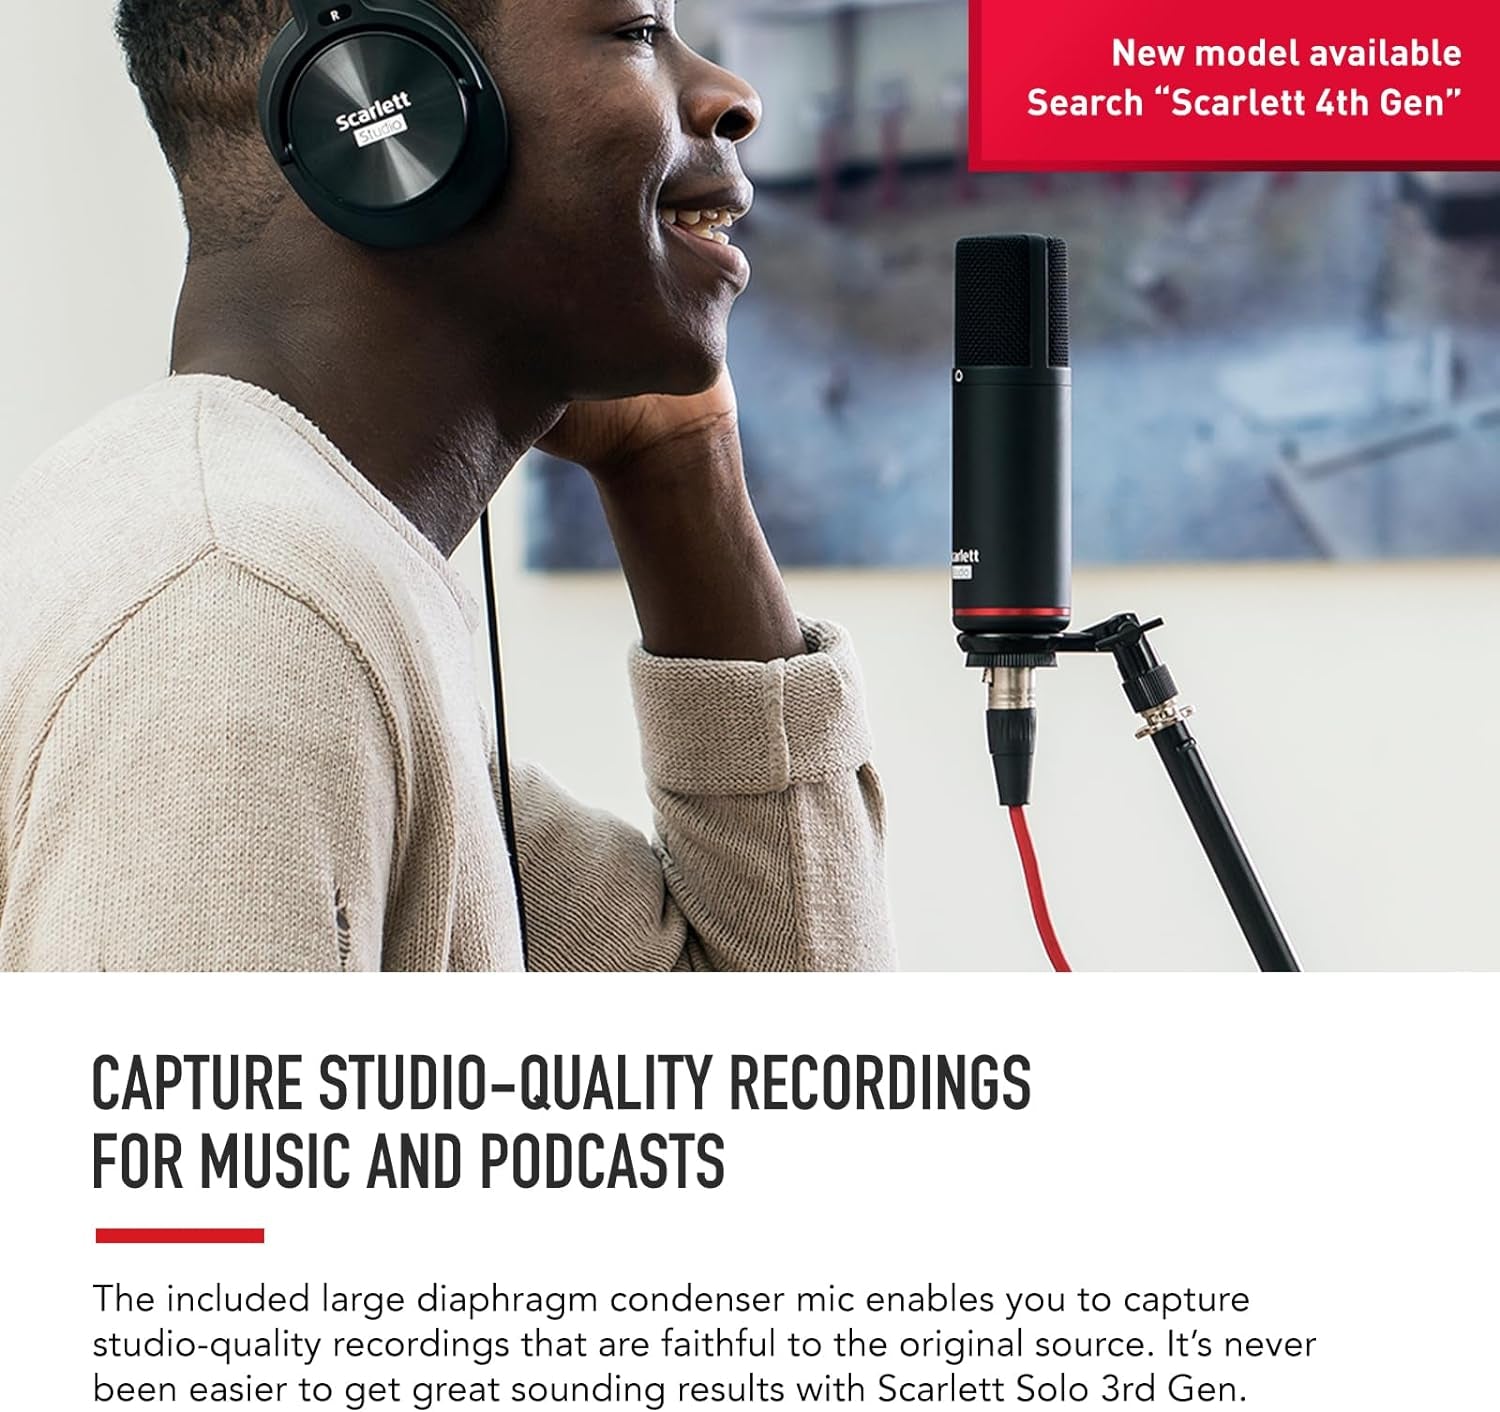 Scarlett Solo Studio 3Rd Gen USB Audio Interface Bundle for the Guitarist, Vocalist or Producer with Condenser Microphone and Headphones for Recording, Songwriting, Streaming and Podcasting